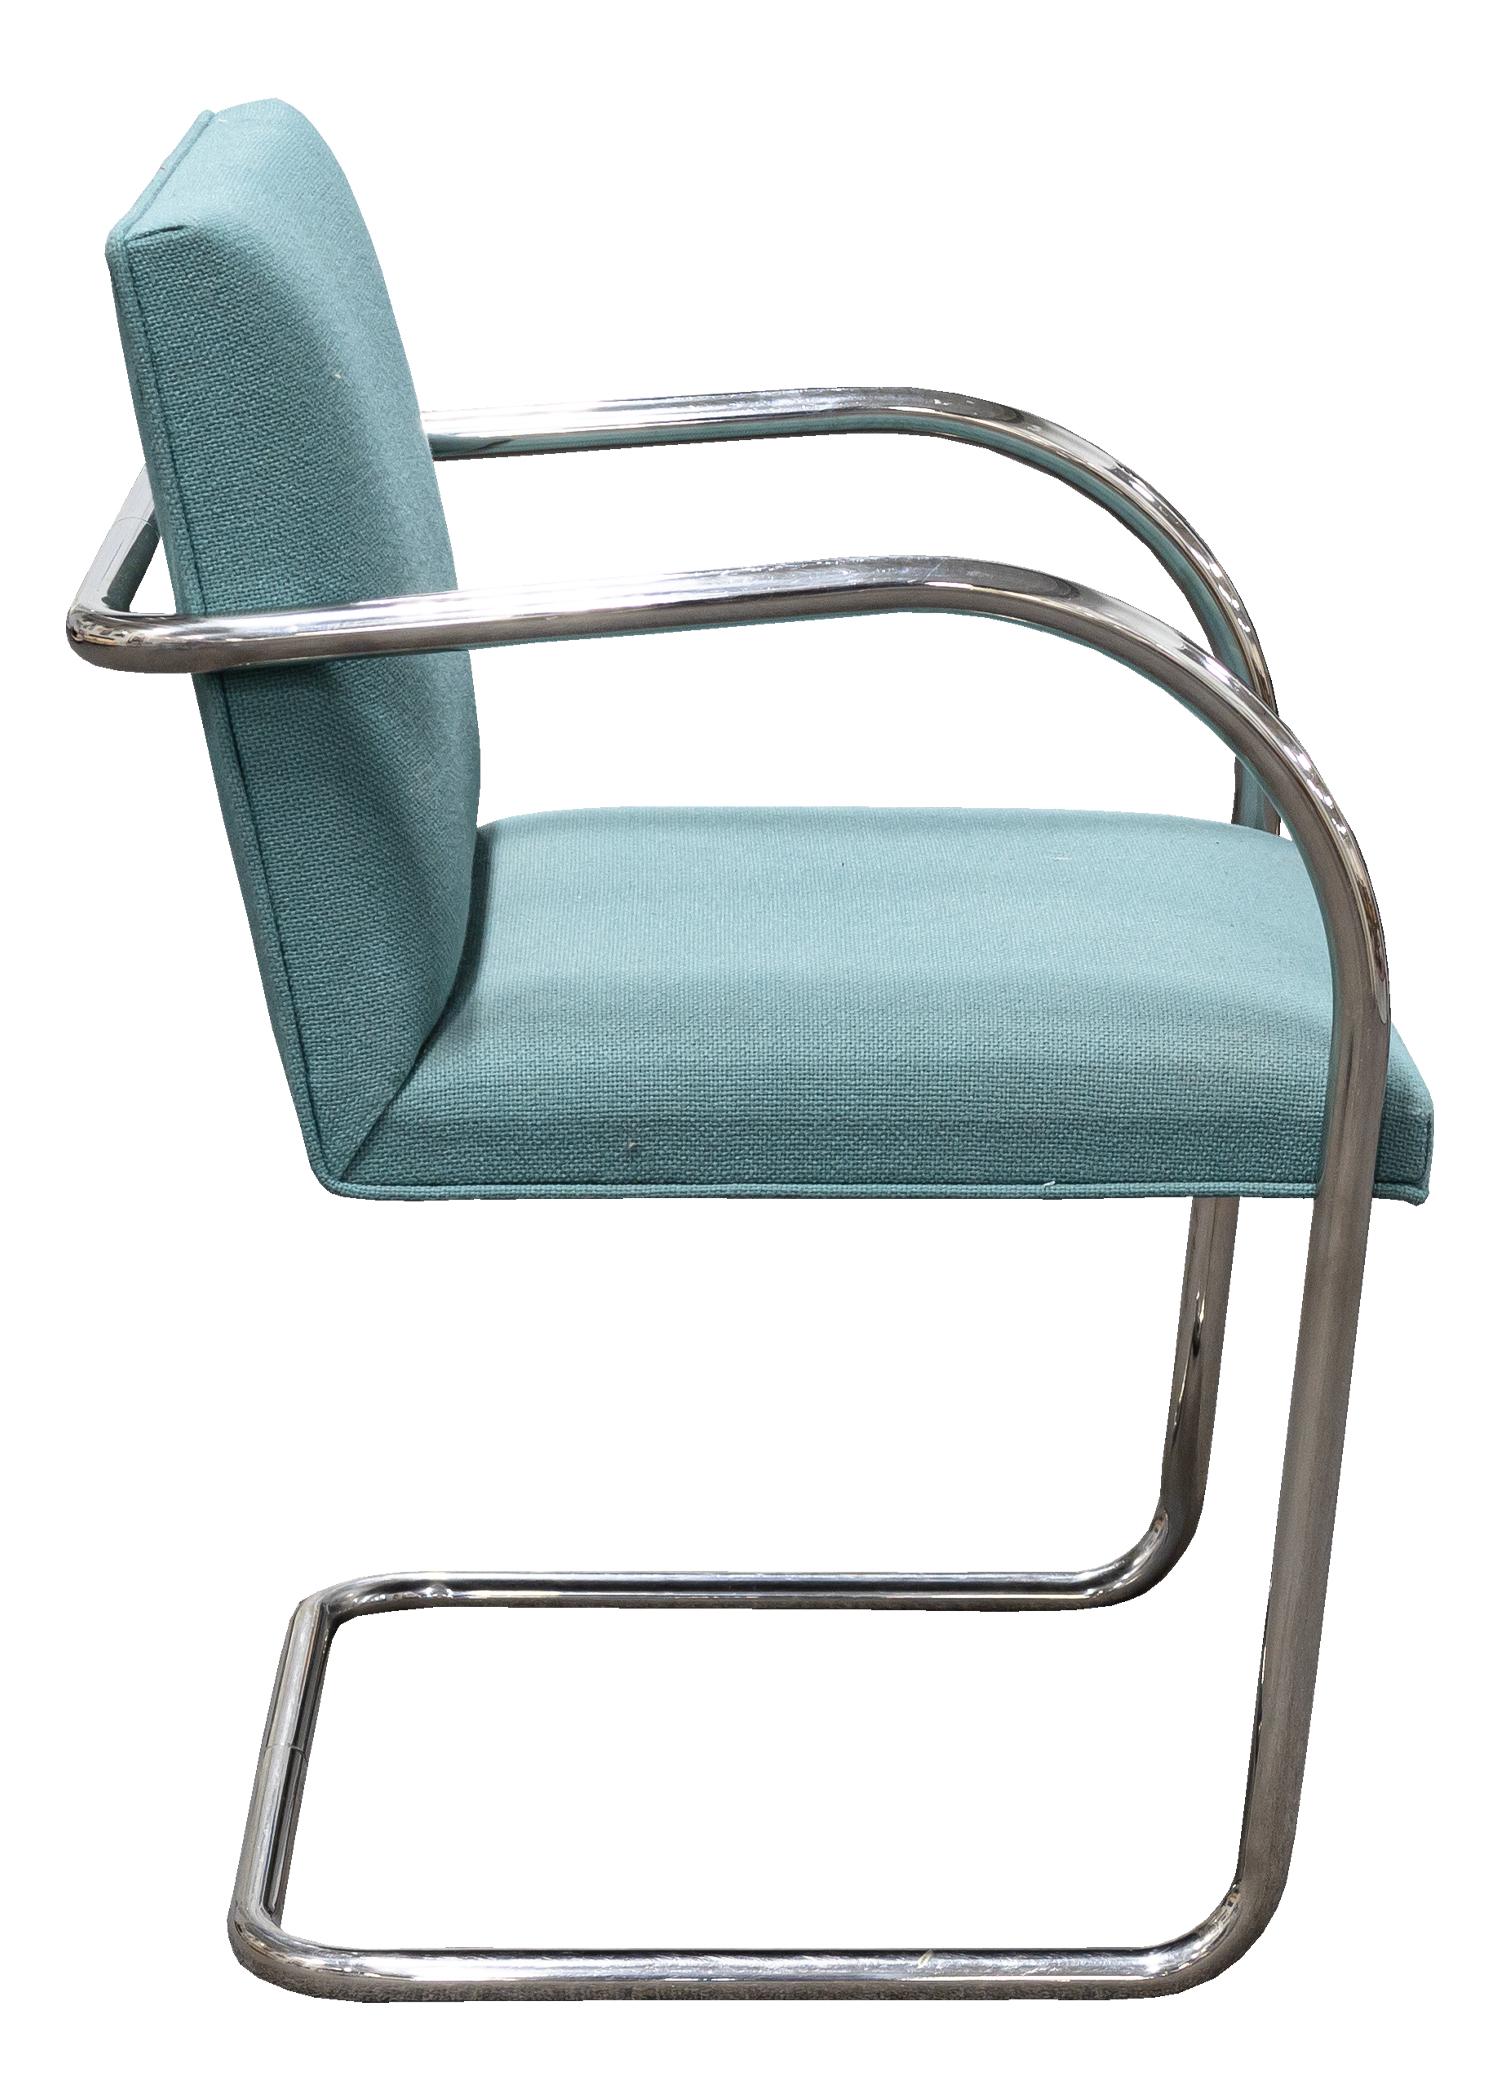 A marvelous modern set of 4 Thonet tubular steel cantilever chairs with light teal colored upholstery seating. Fabric is in very good condition and the teal color is perfect for modern interiors. Curved cantilever frame is iconic in mid-century